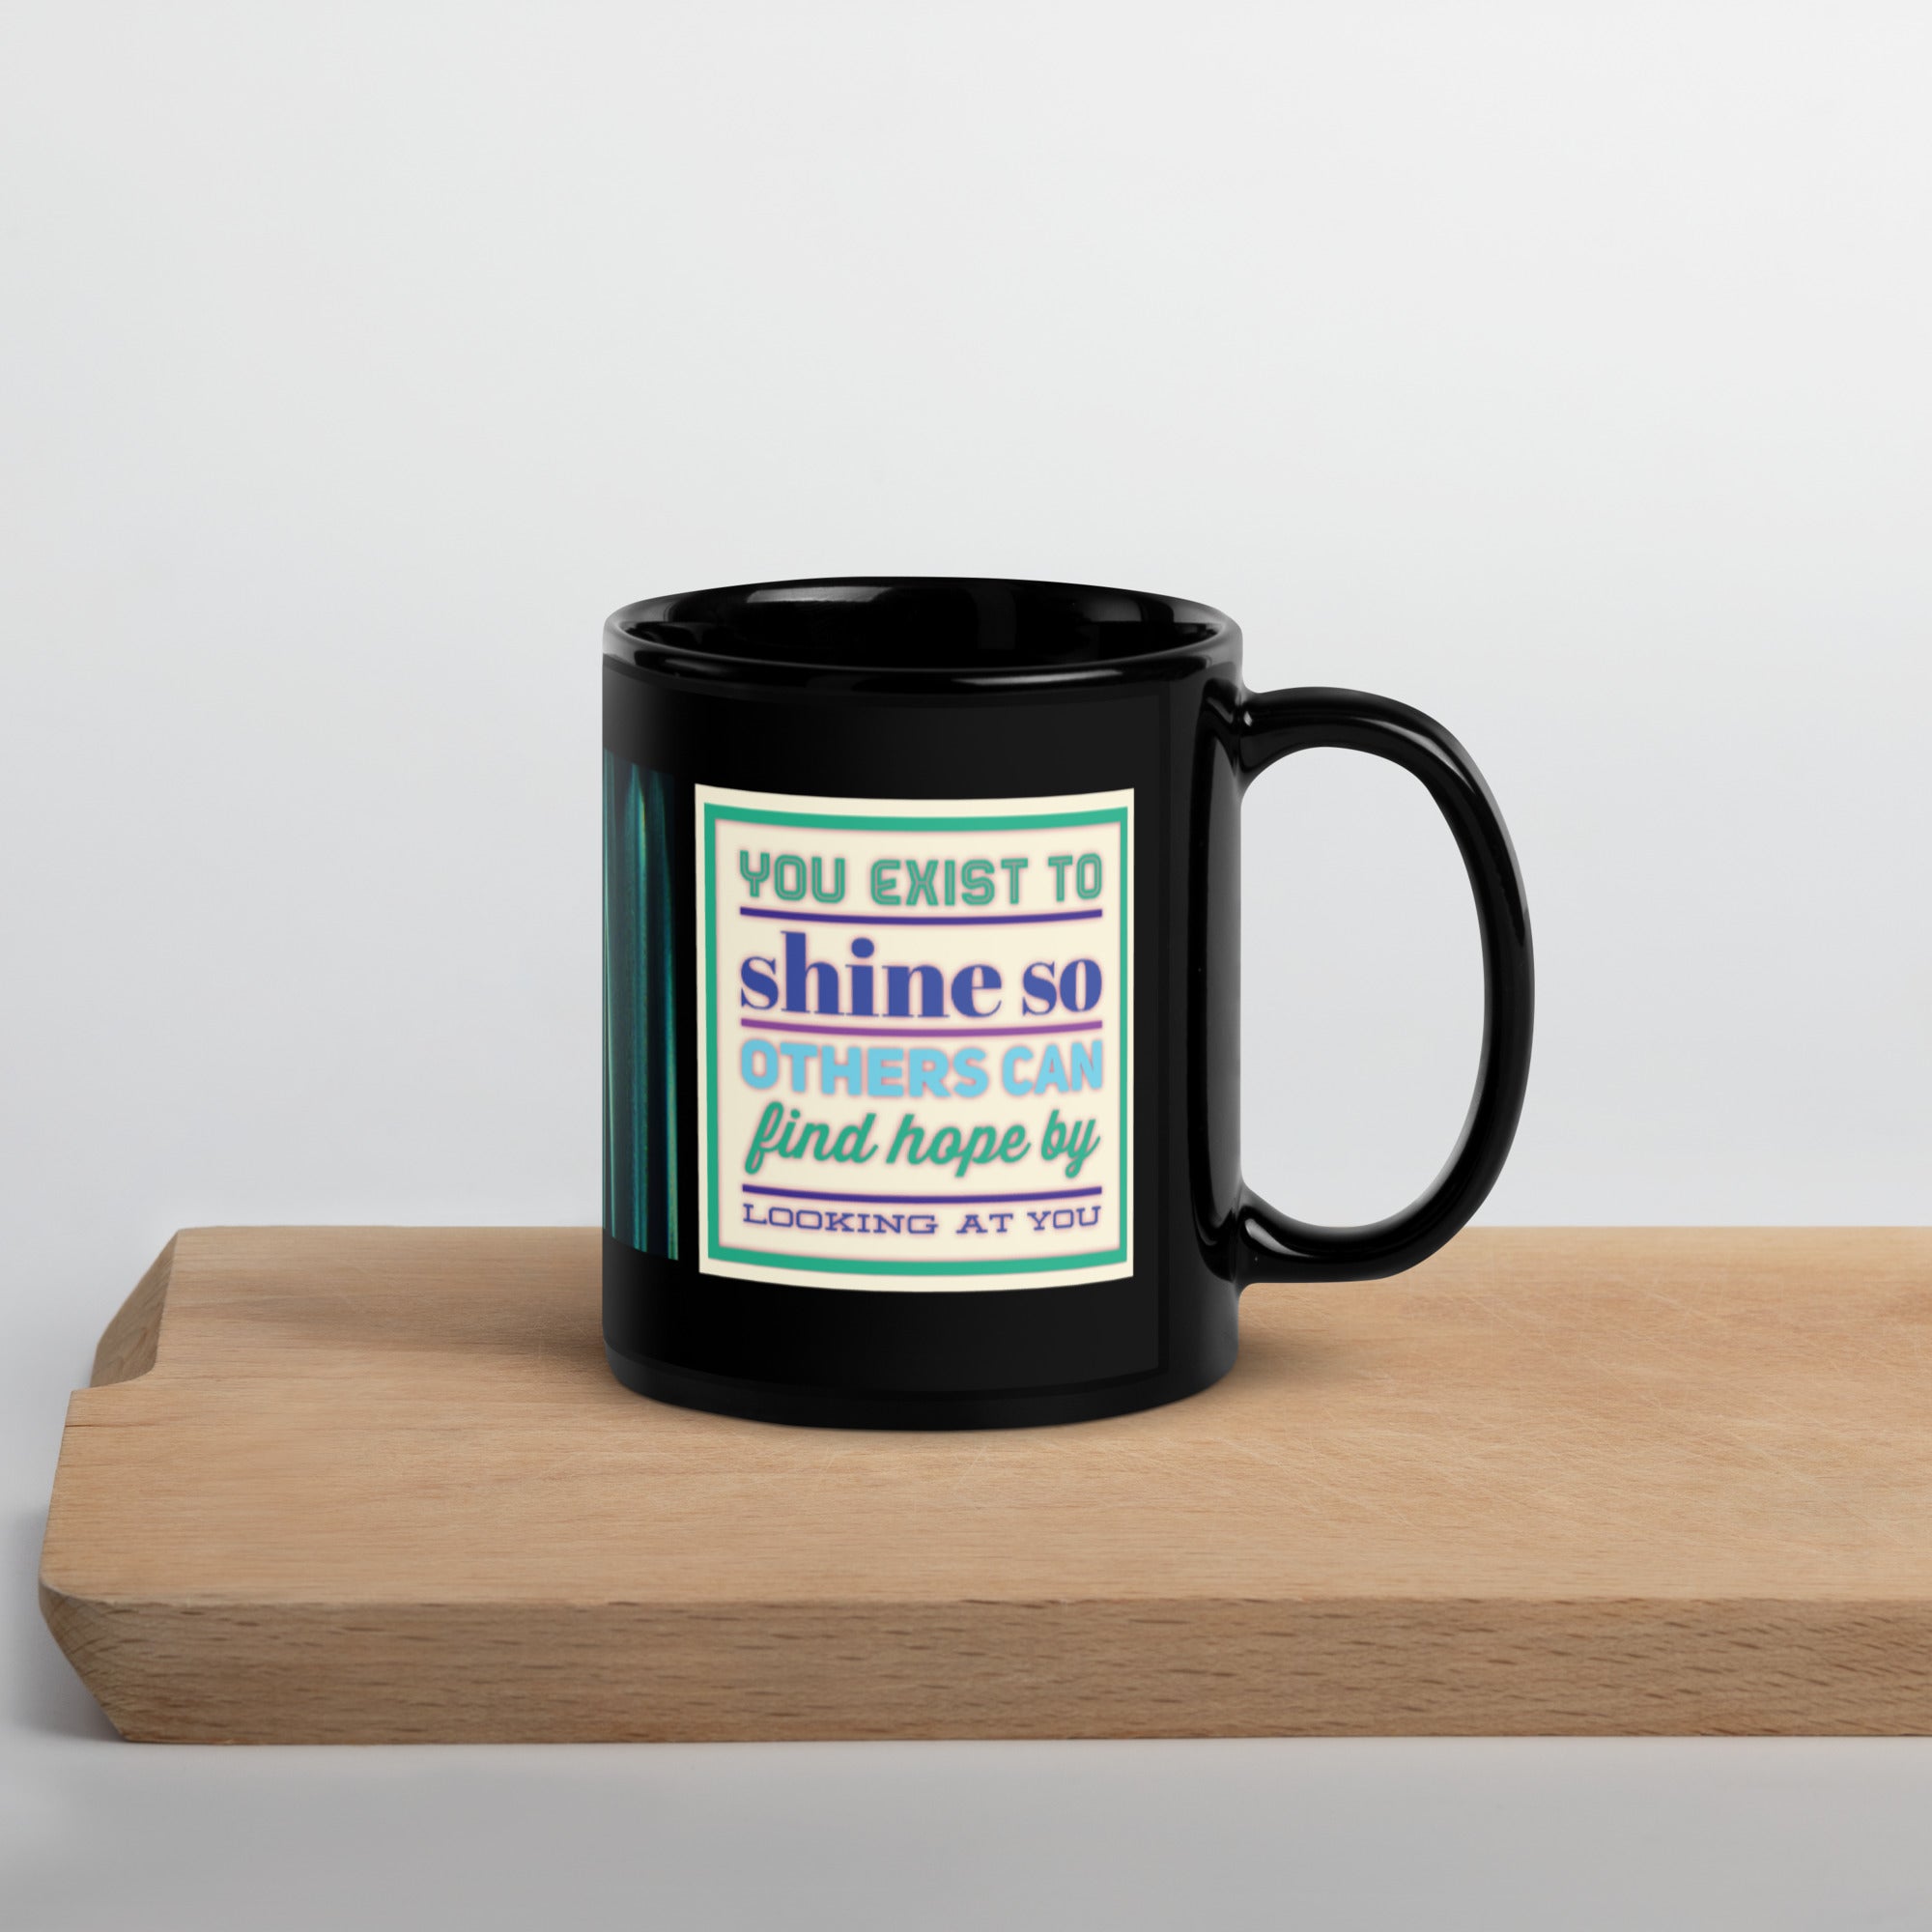 GloWell Designs - Black Glossy Mug - Motivational Quote - You Exist to Shine - GloWell Designs